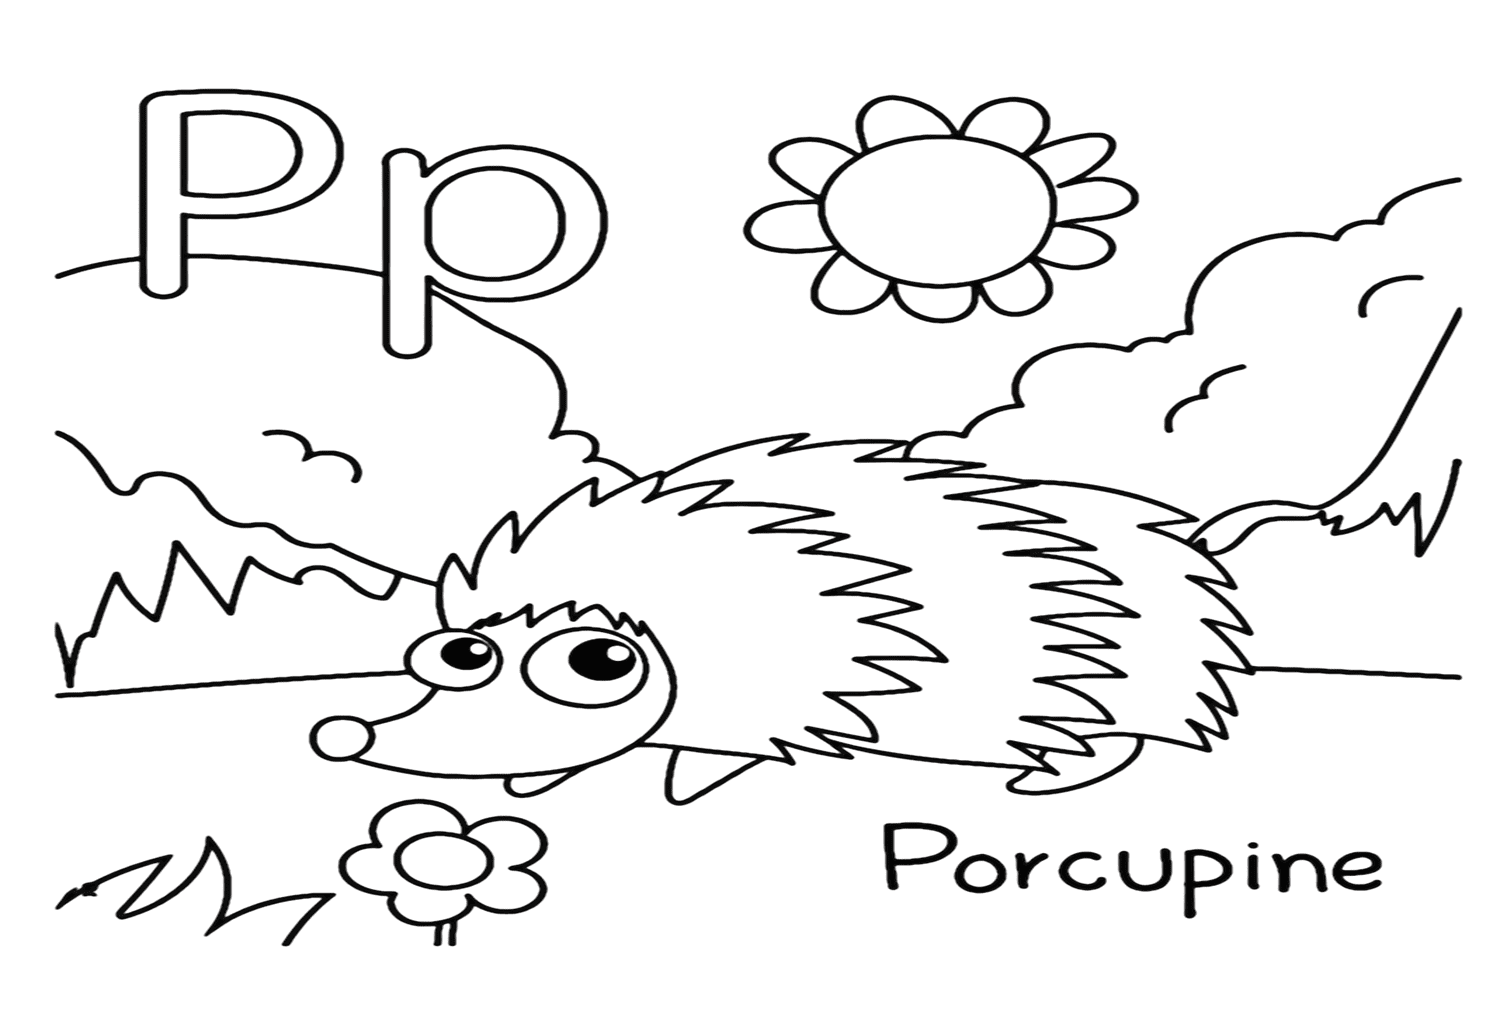 Letter P For Porcupine Coloring Page from Porcupine